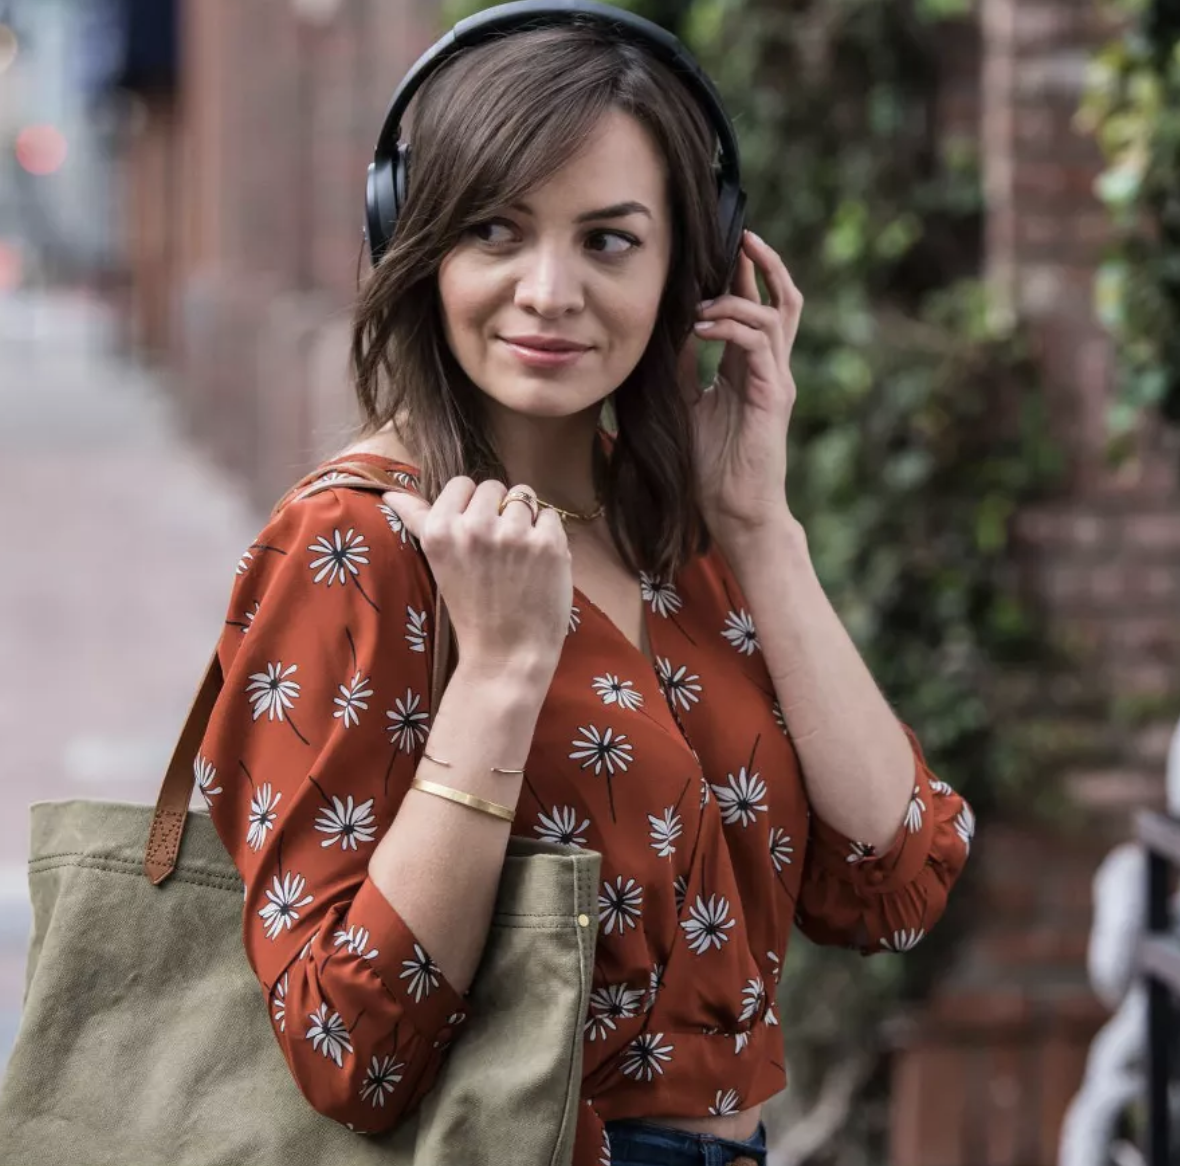 Model listening to music with black over the ear headphones